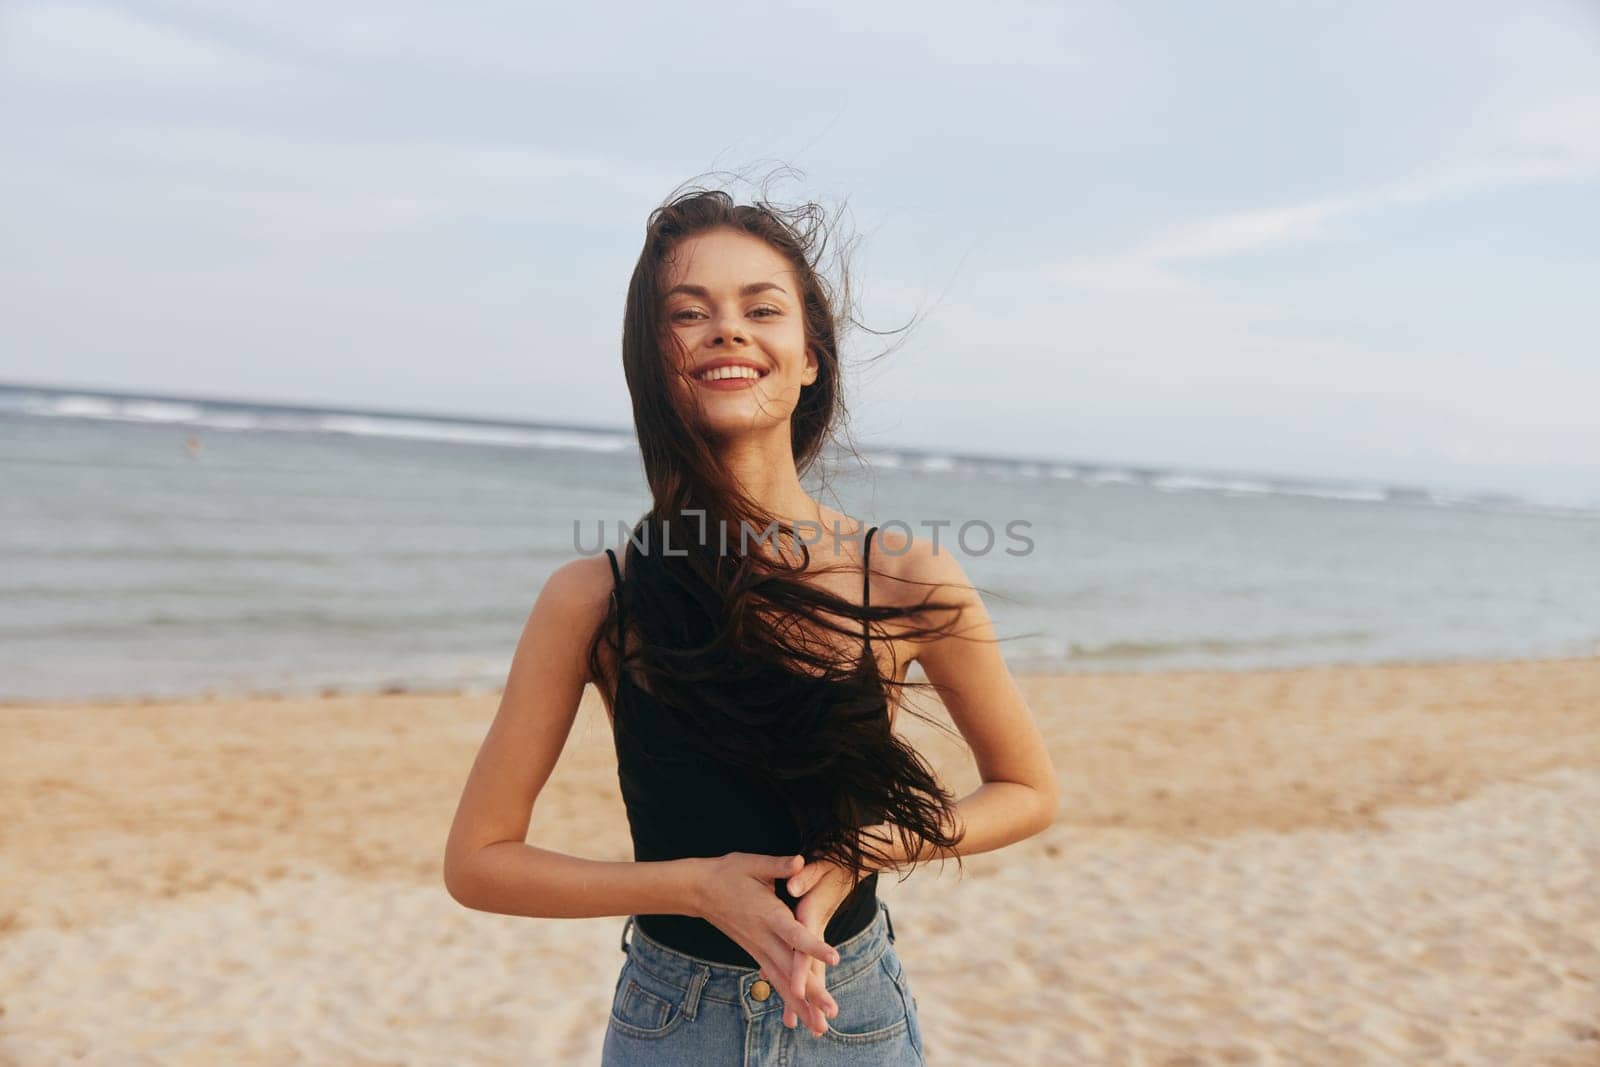 ocean woman copy-space travel enjoyment beach female running freedom smile space summer tropical lifestyle relax sand sea coast vacation copy sunset peaceful